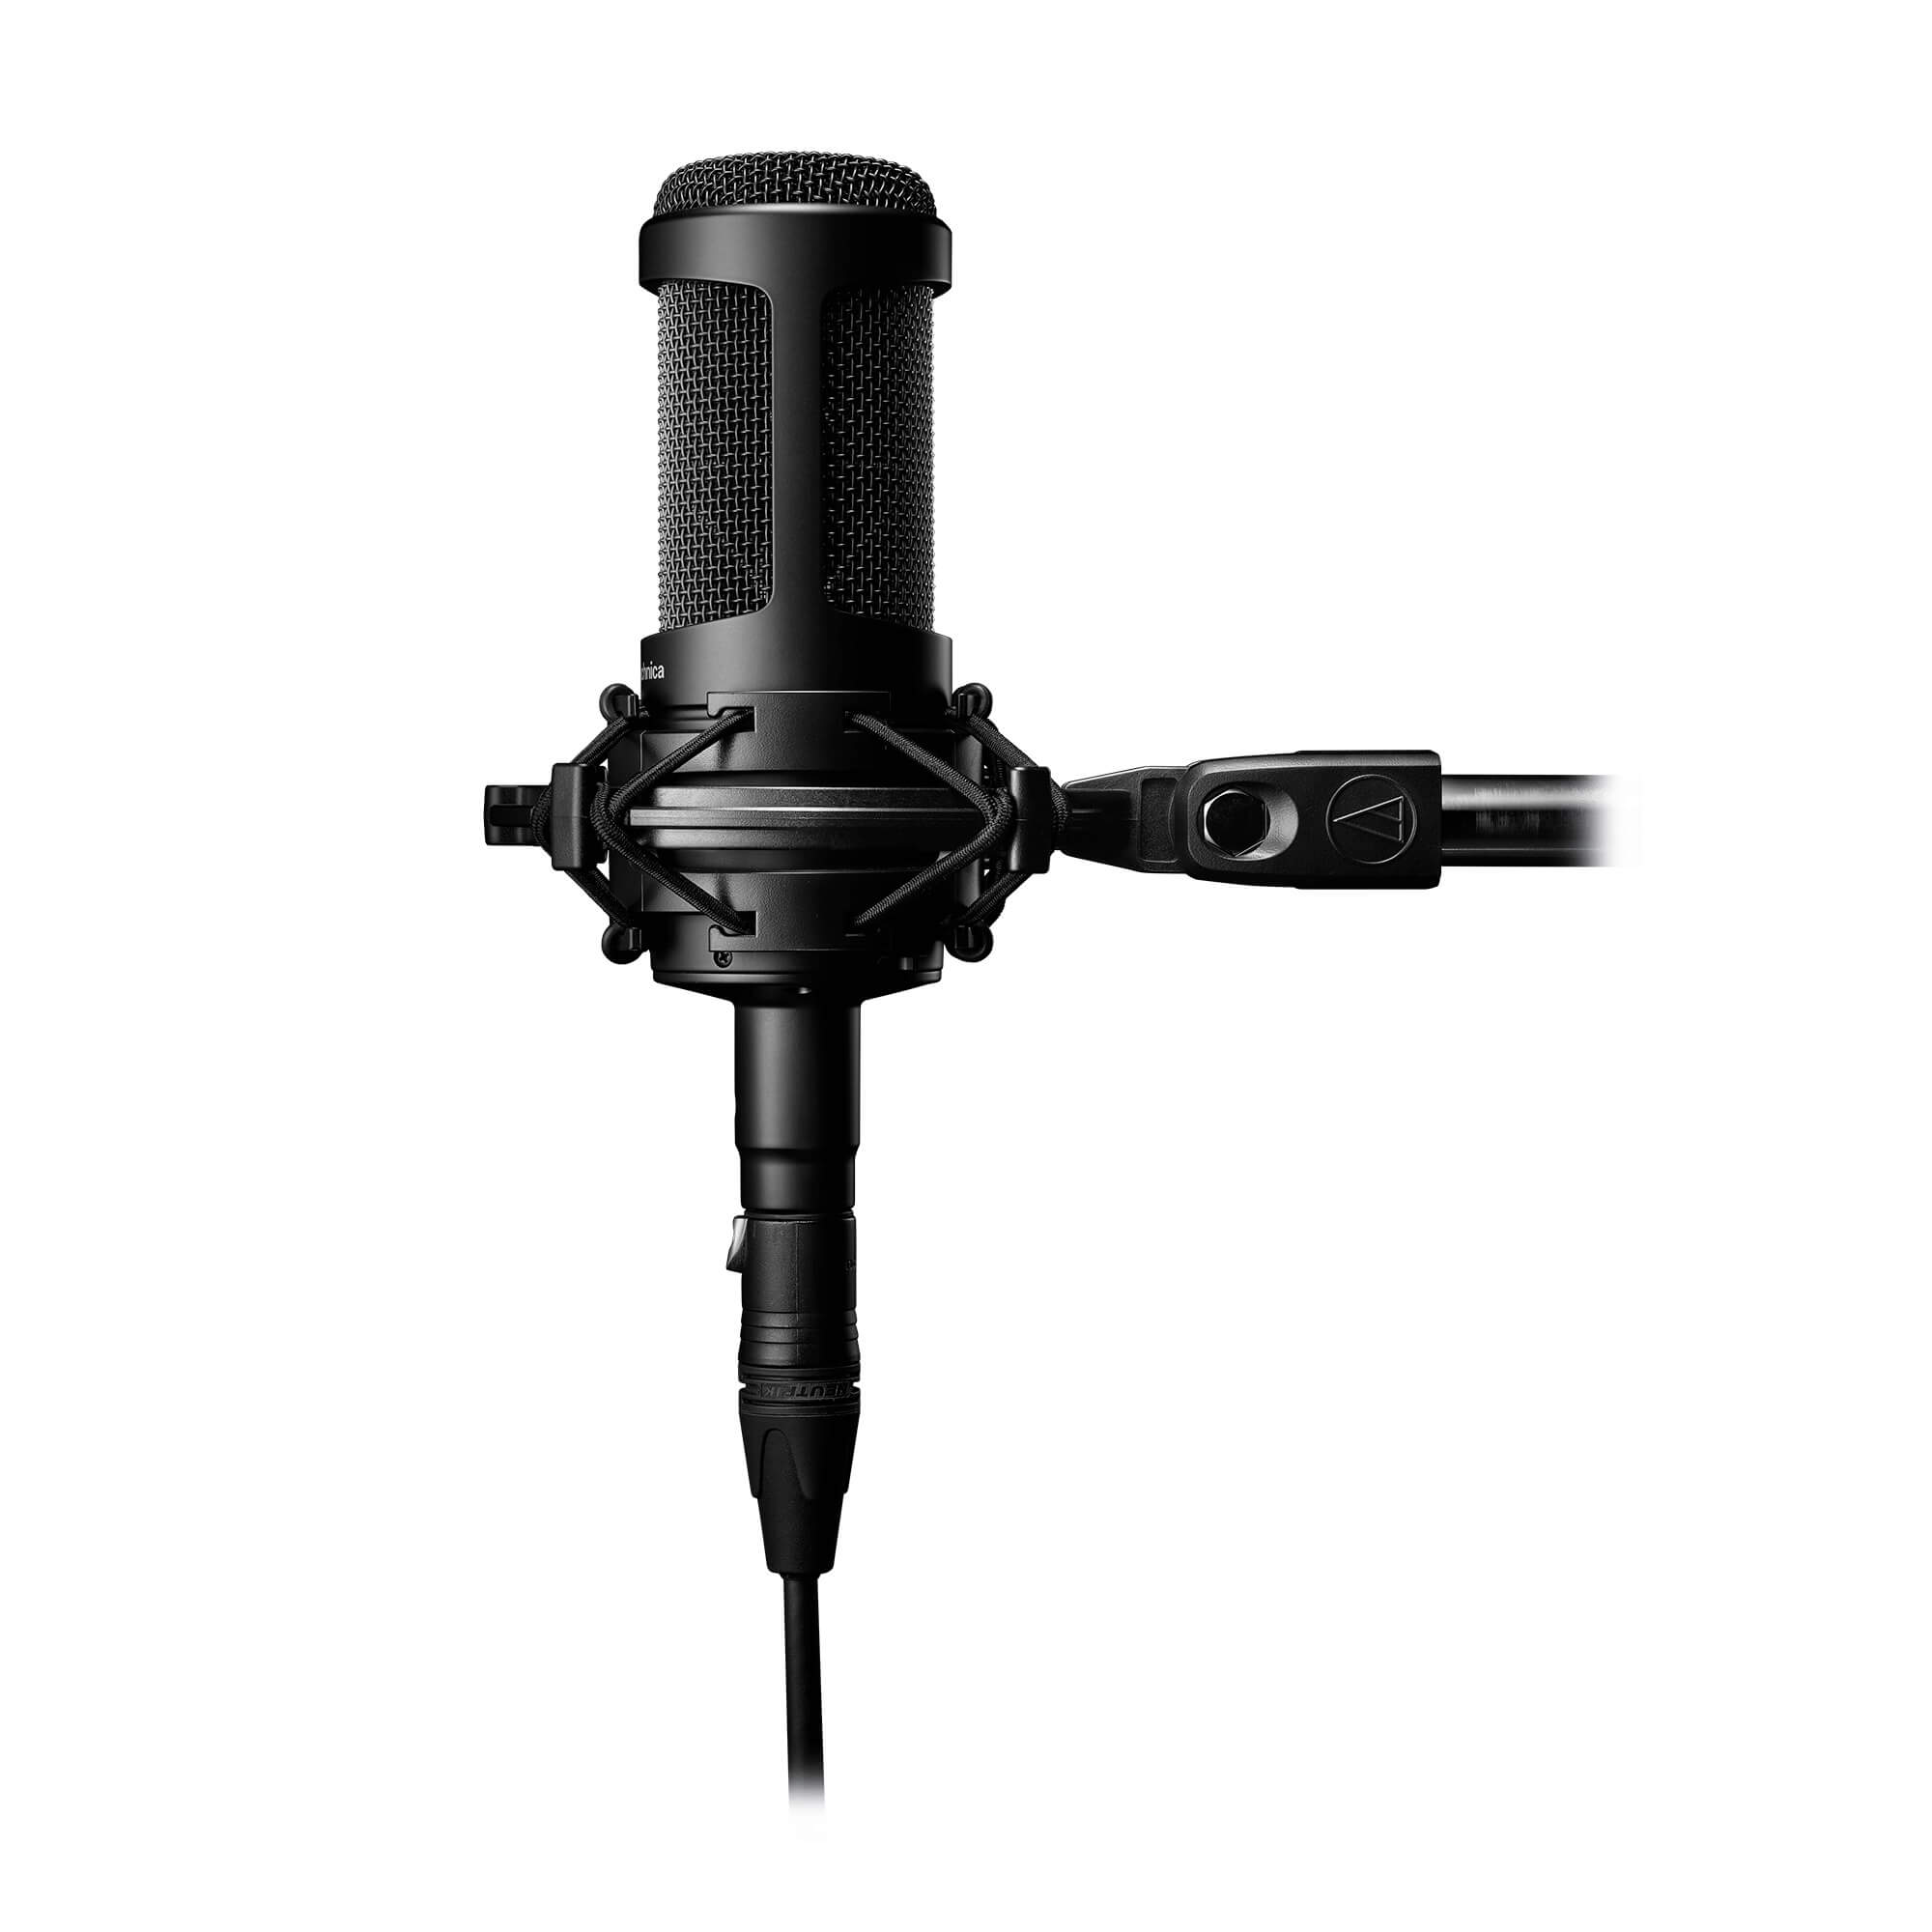 Audio-Technica AT2050 - Multi-pattern Condenser Microphone, with included shock mount